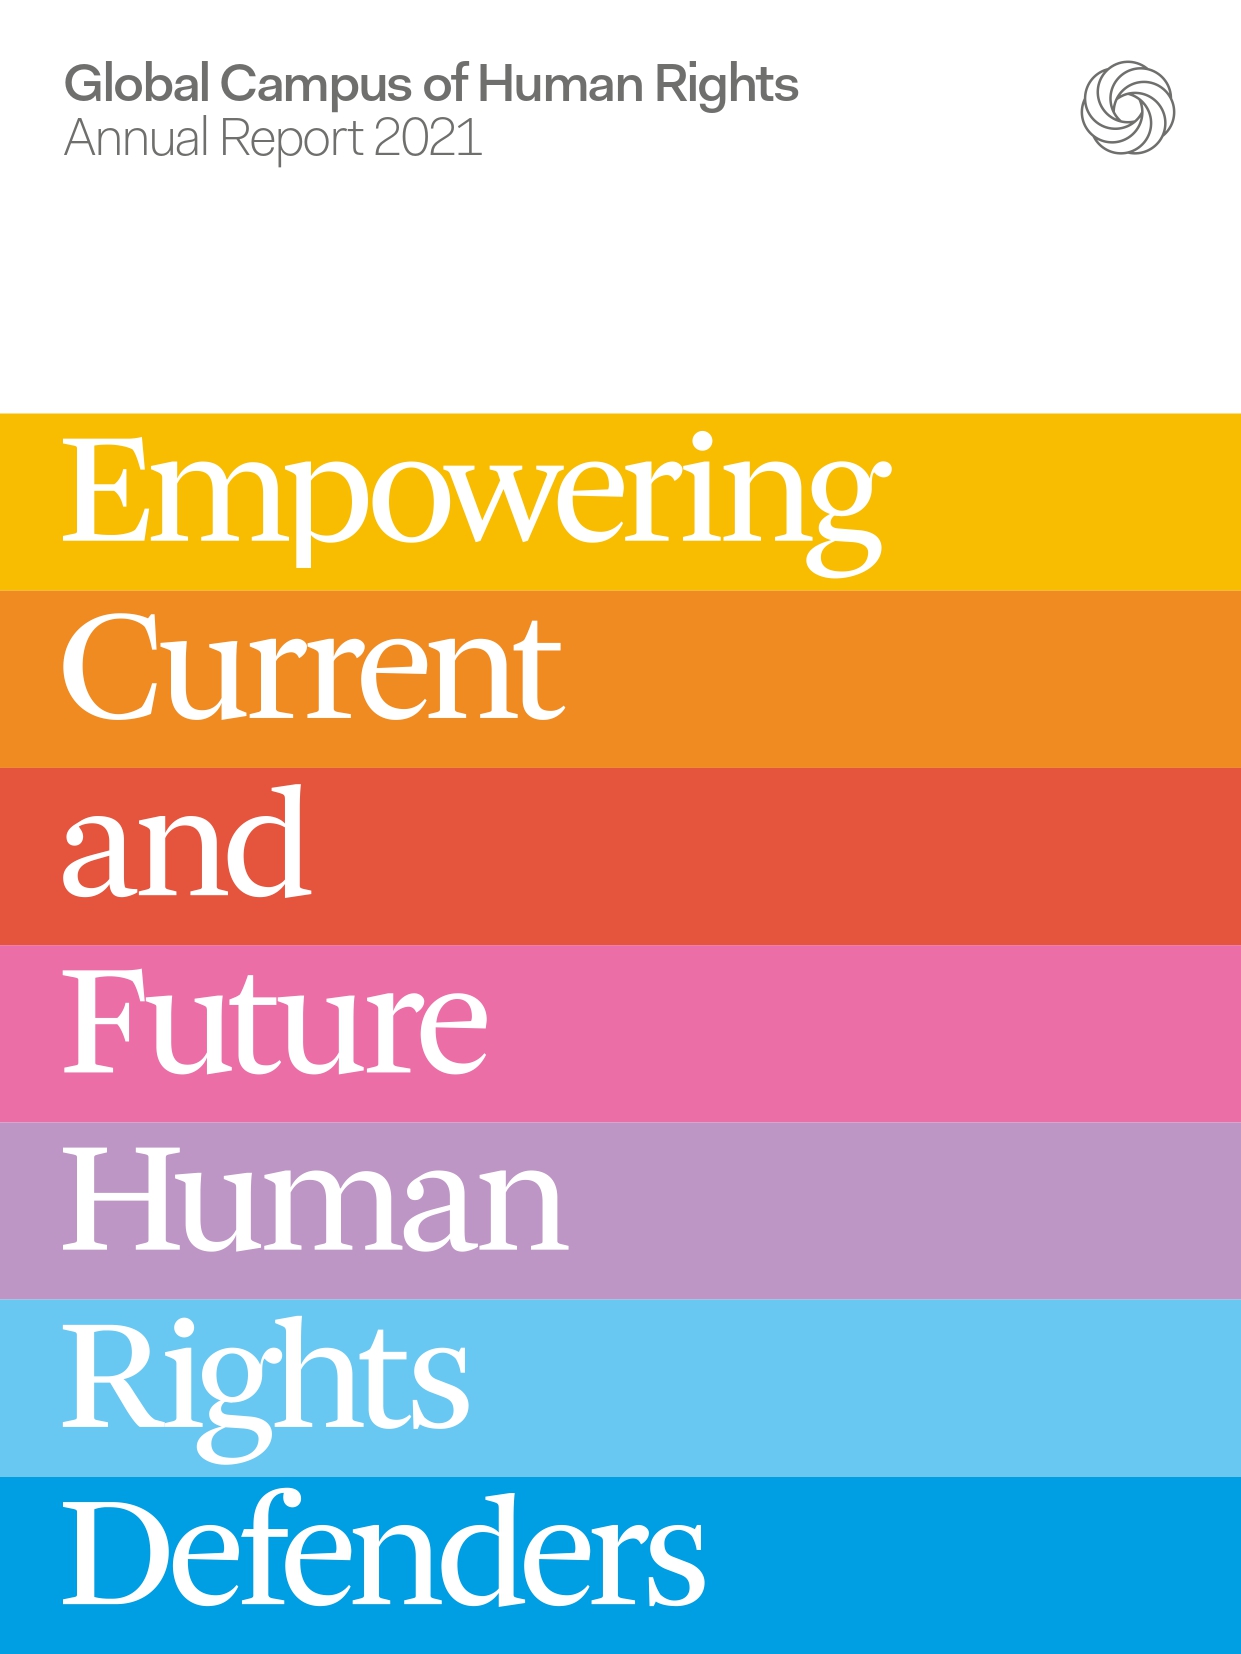 Global Campus of Human Rights Annual Report